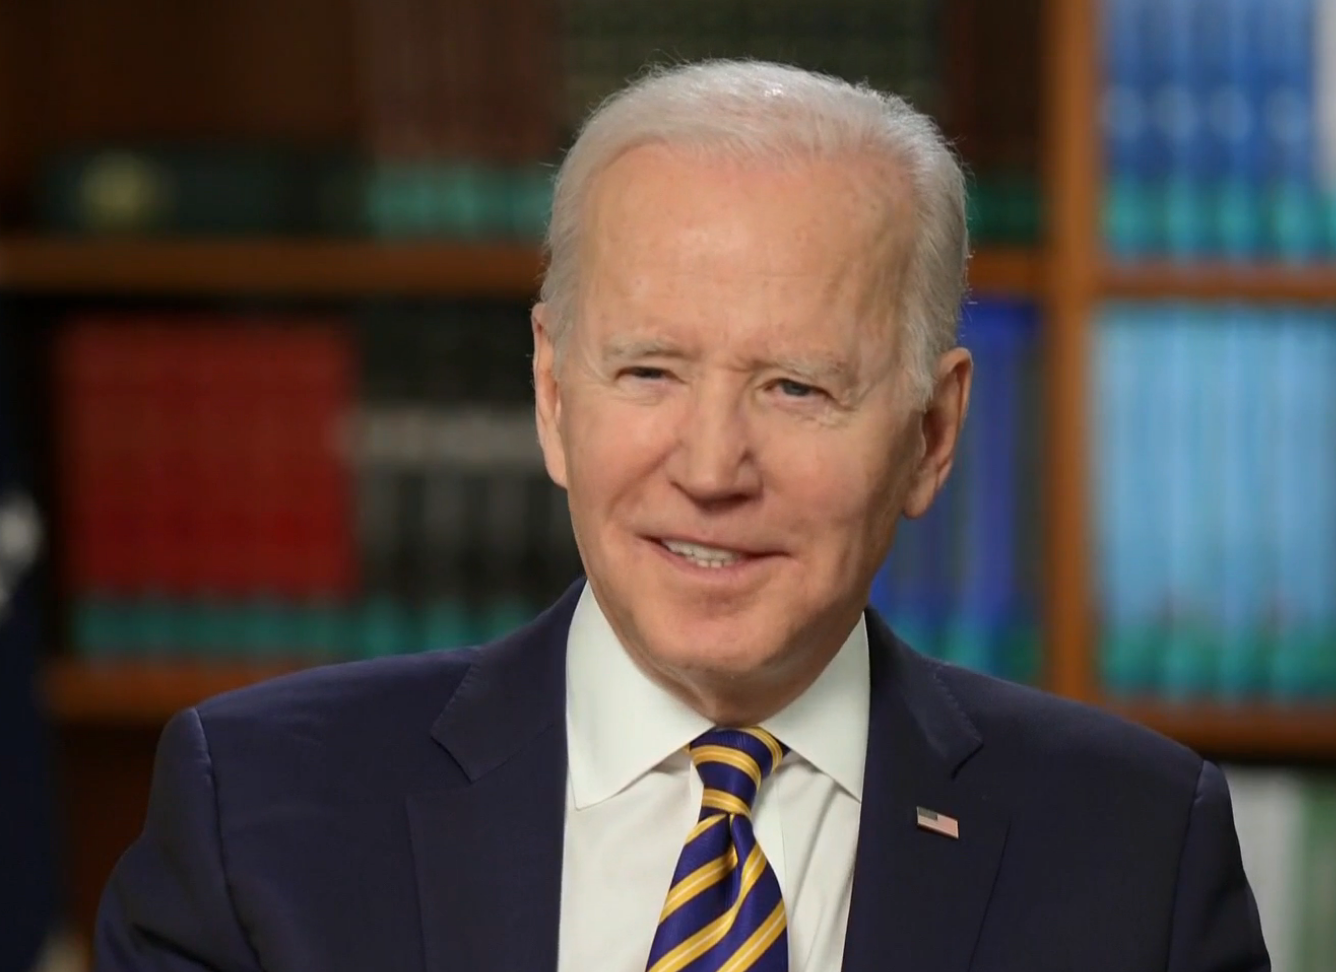 President Biden spoke about freedoms in an interview with NBC